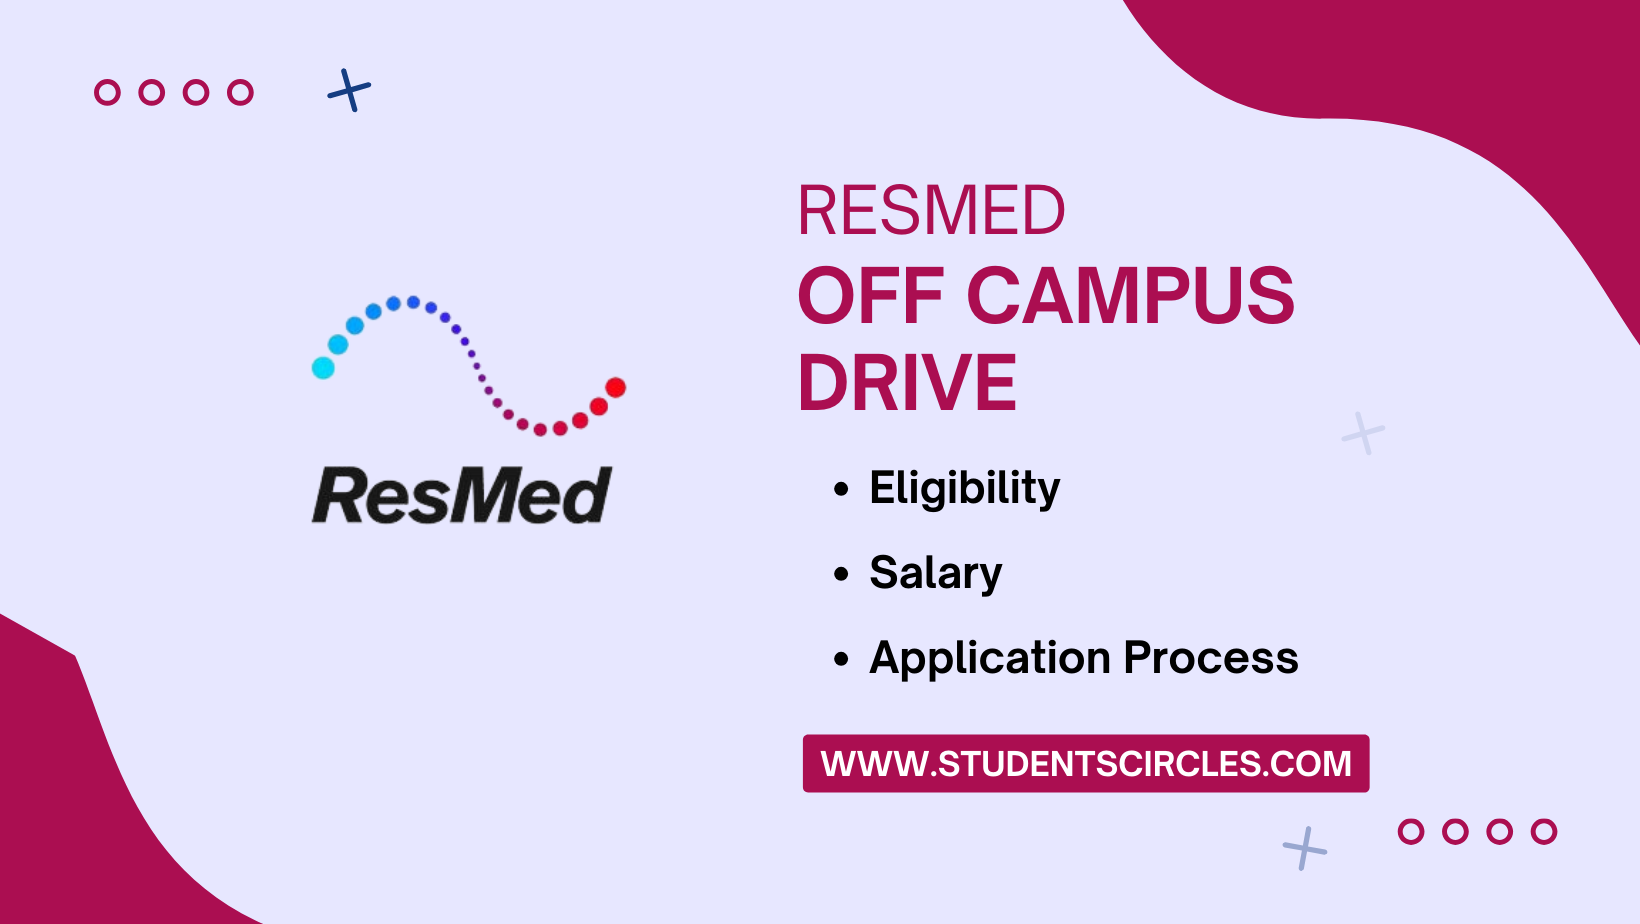 ResMed Off Campus Drive